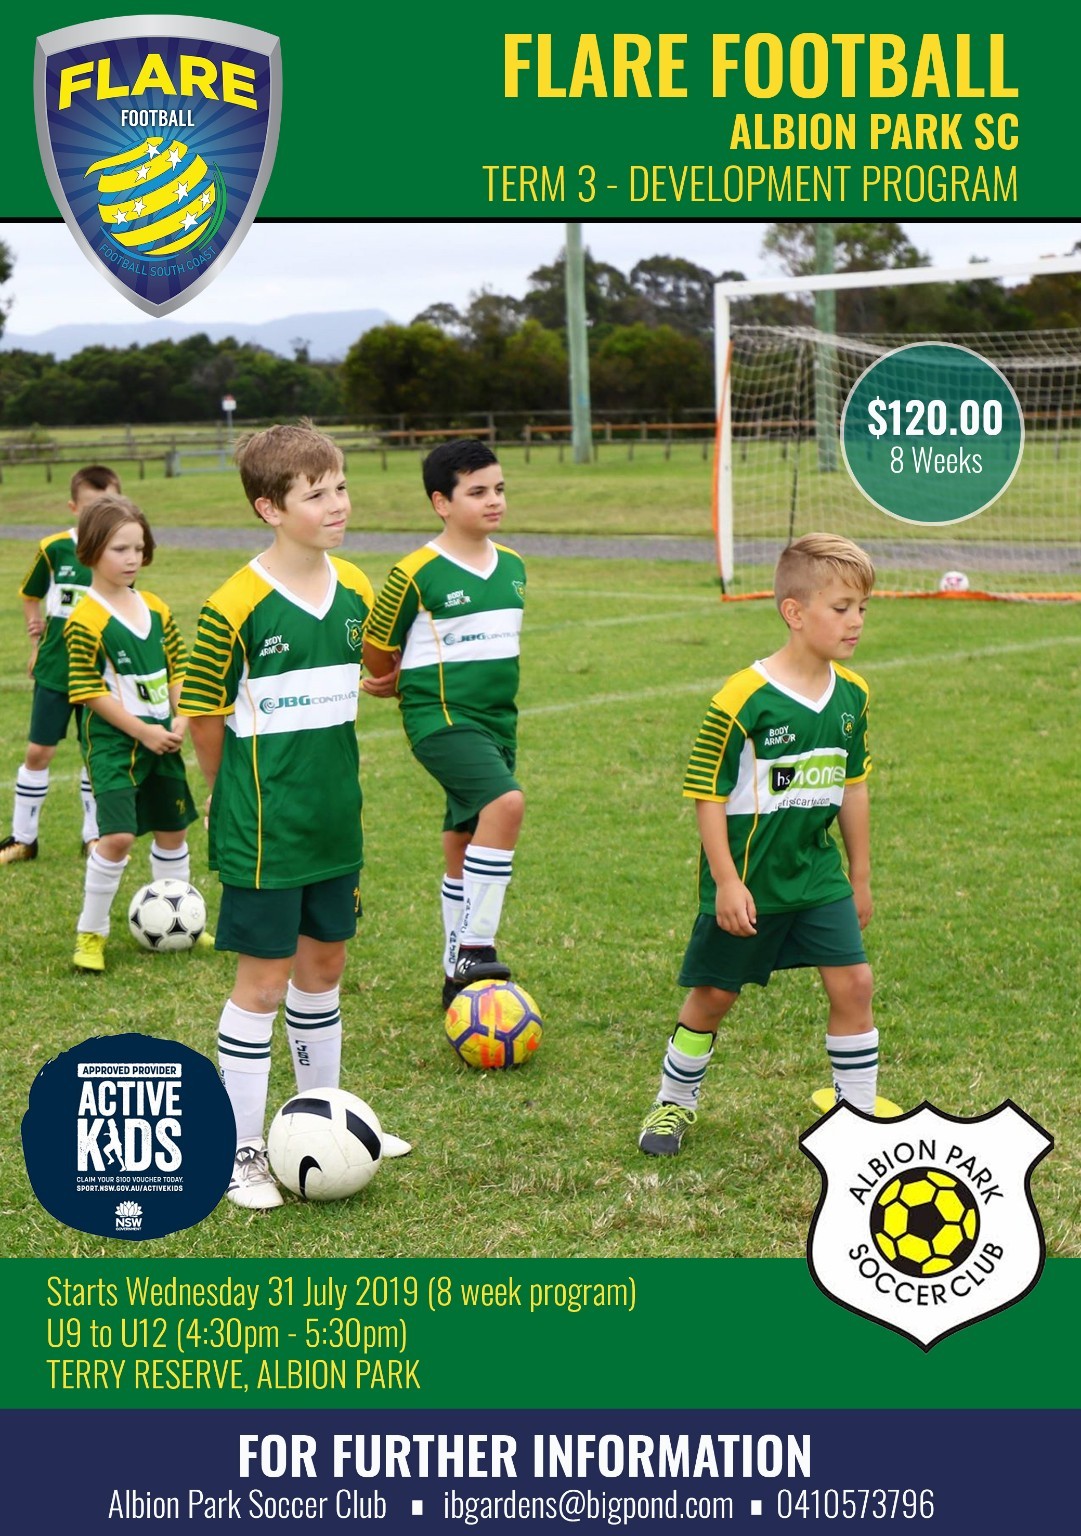 ALBION PARK IN-CLUB COACHING